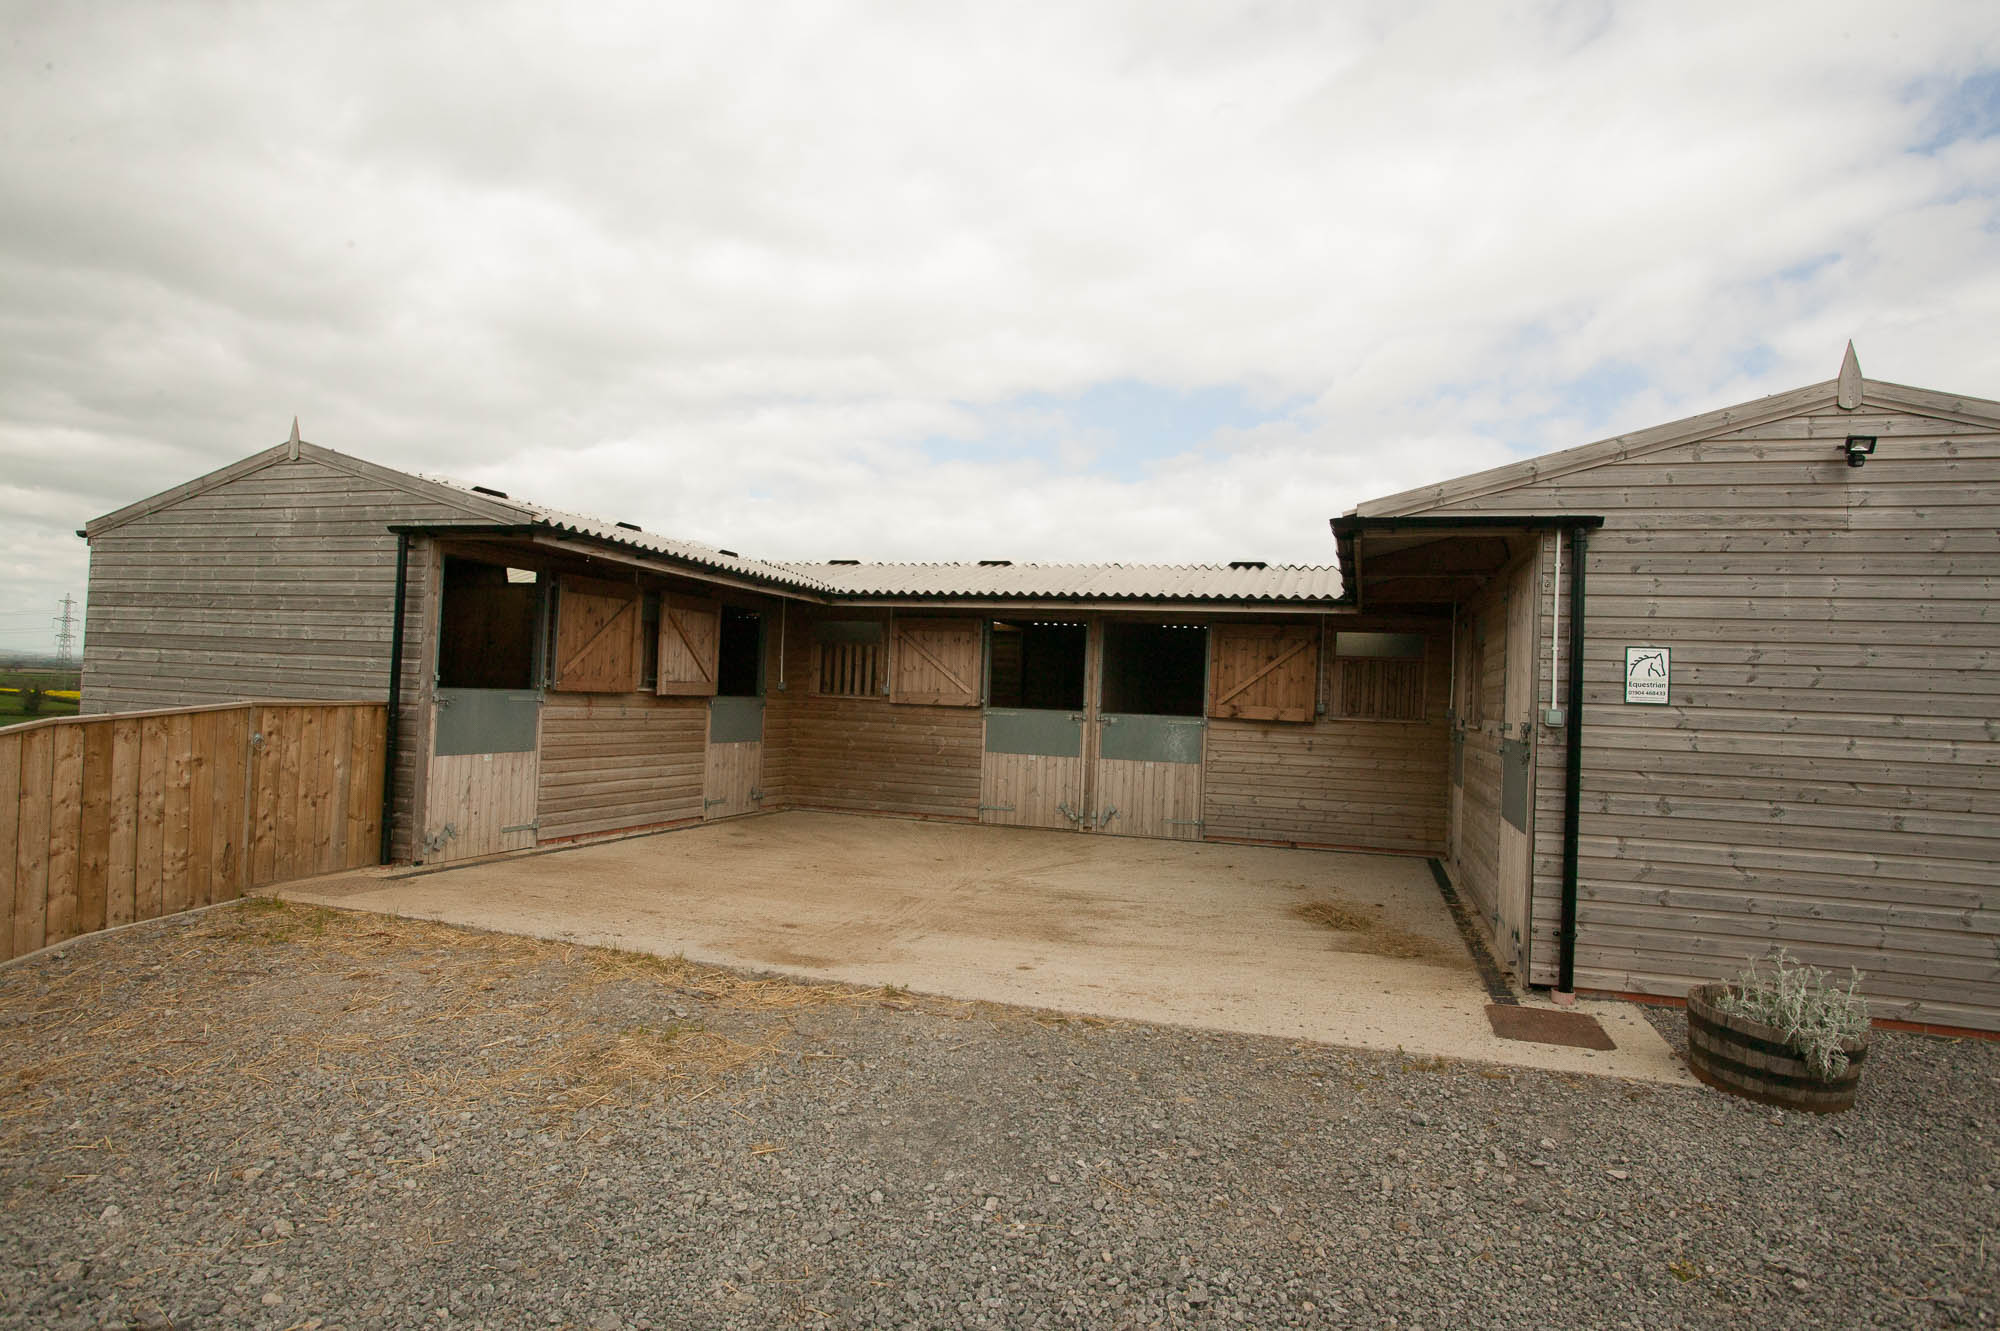 Modern, fully equipped stables and tack room